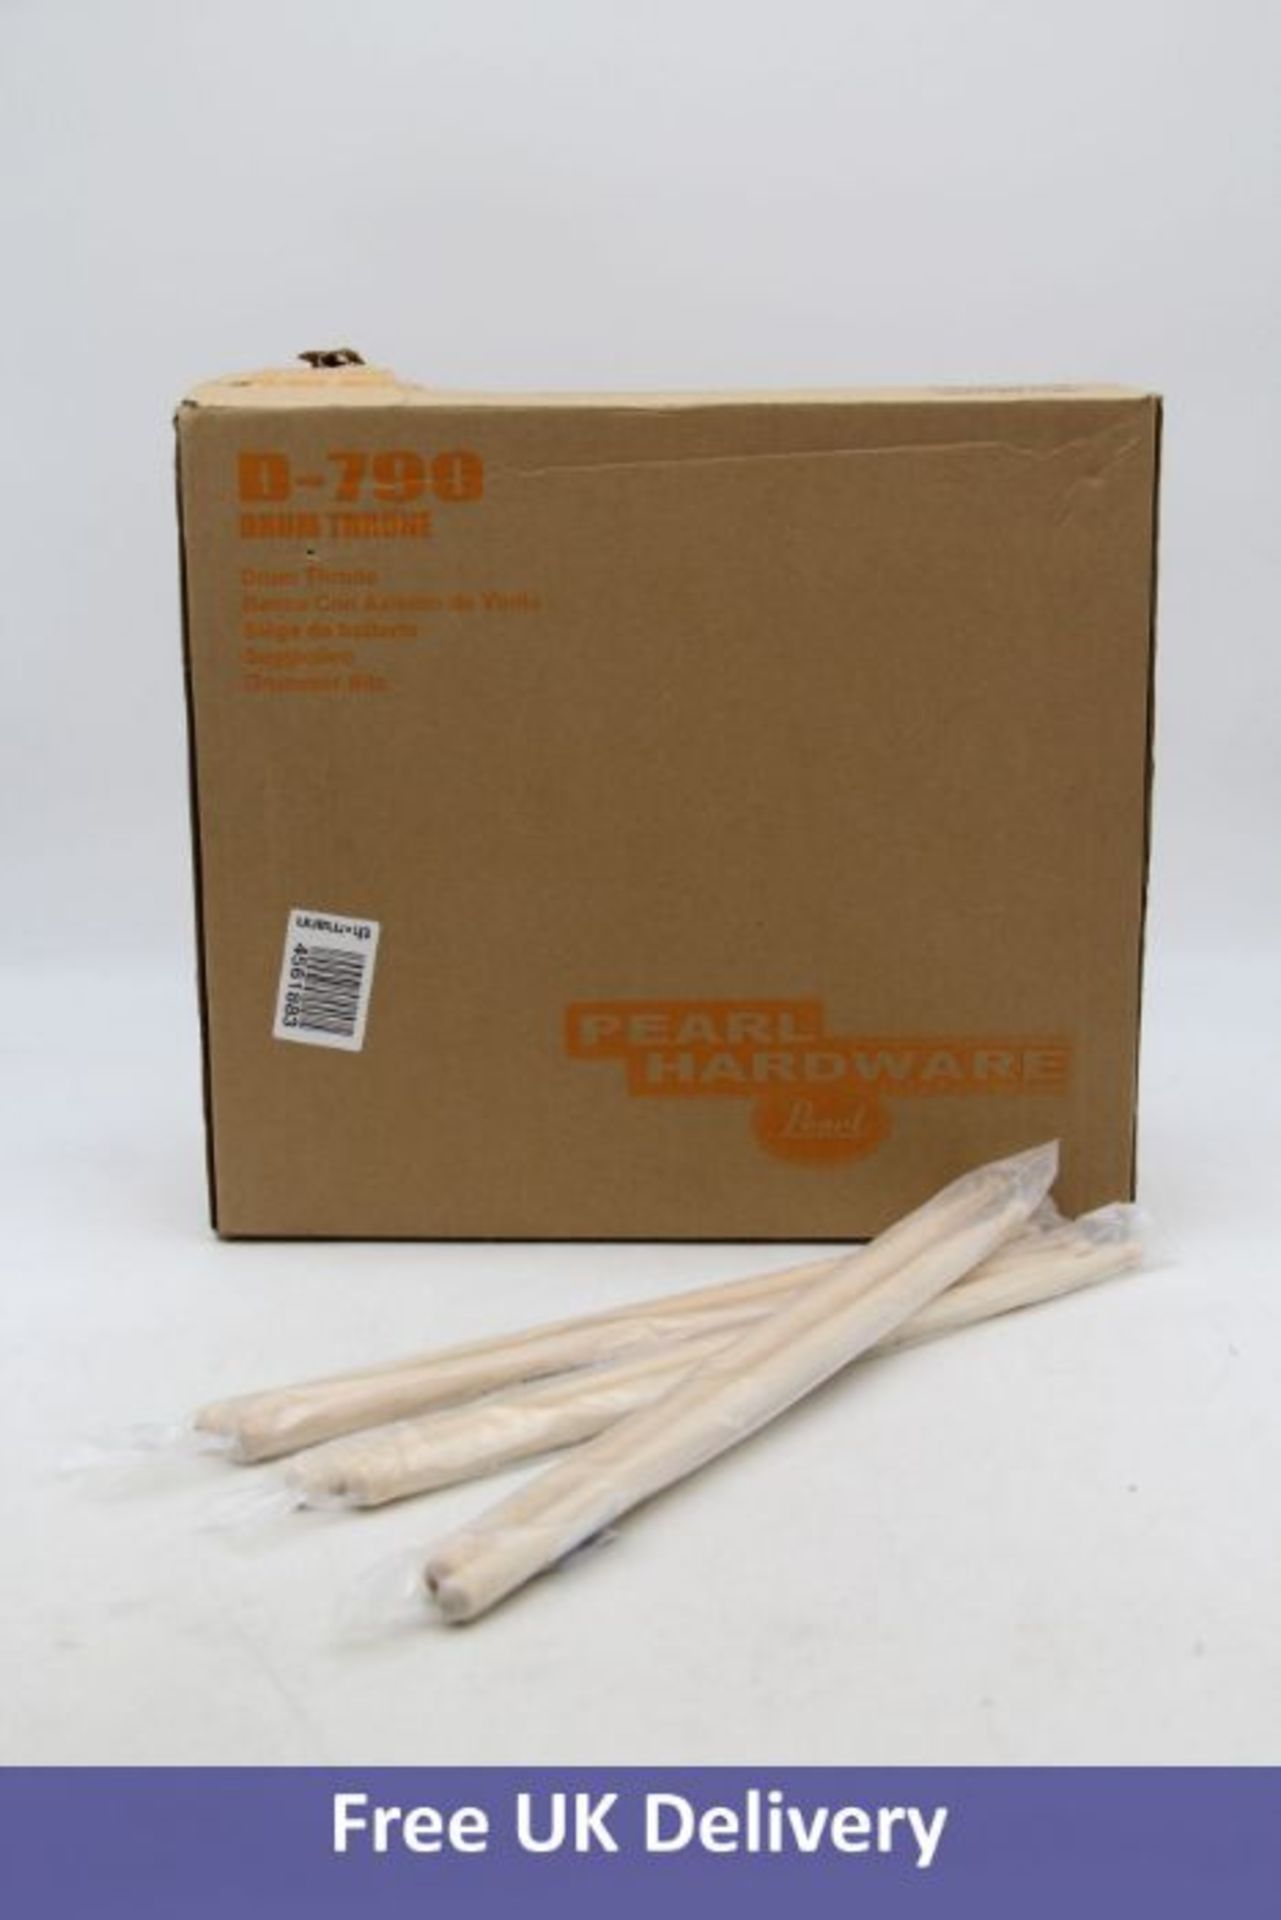 Four Drum Items to include 3x Millenium 5A Drumsticks, 1x Pearl D-790 Drum Throne. Box damaged